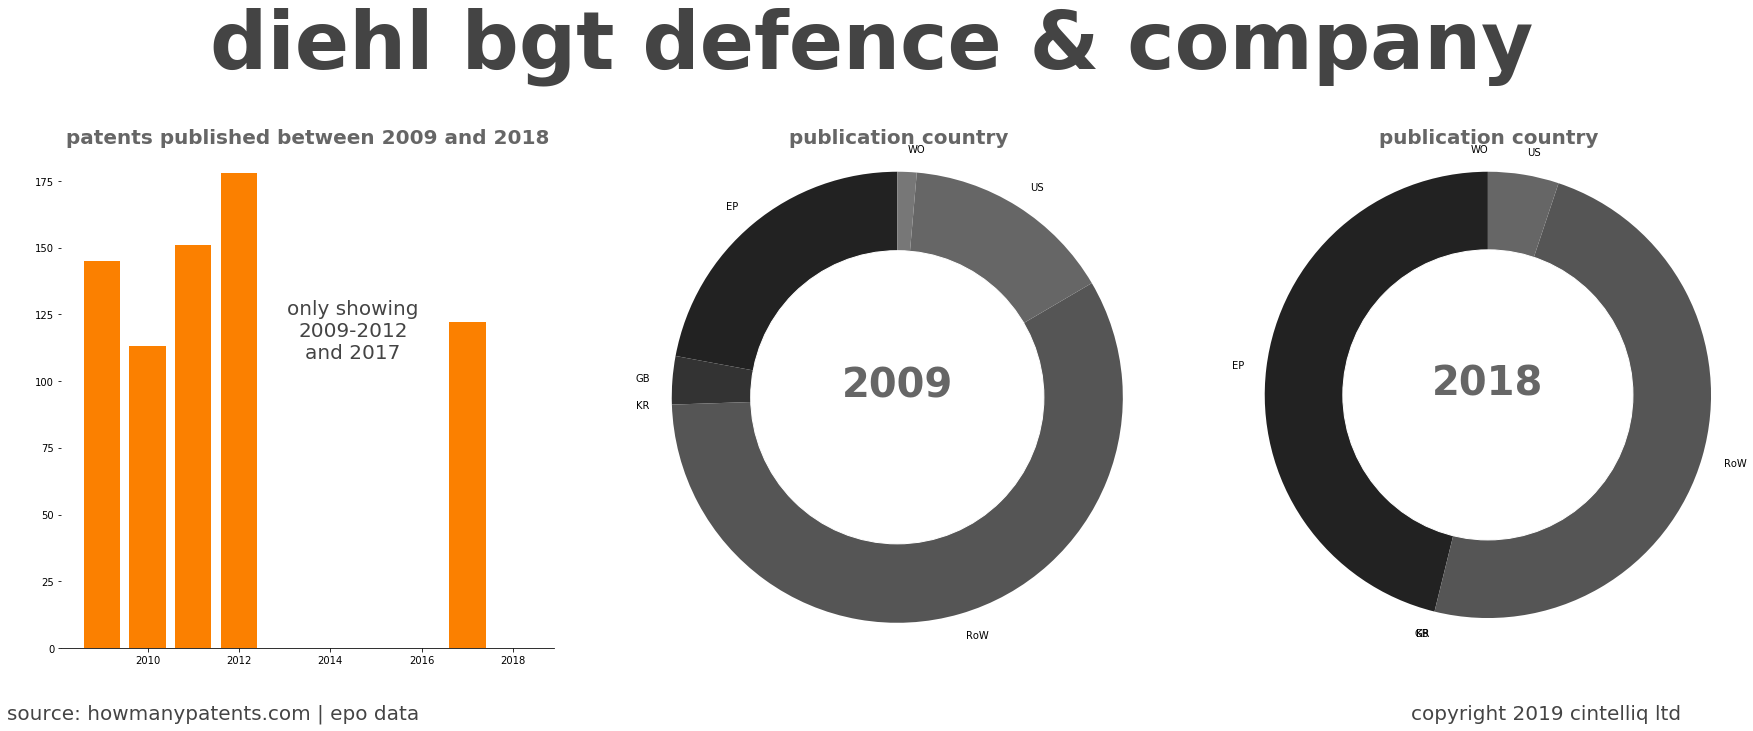 summary of patents for Diehl Bgt Defence & Company